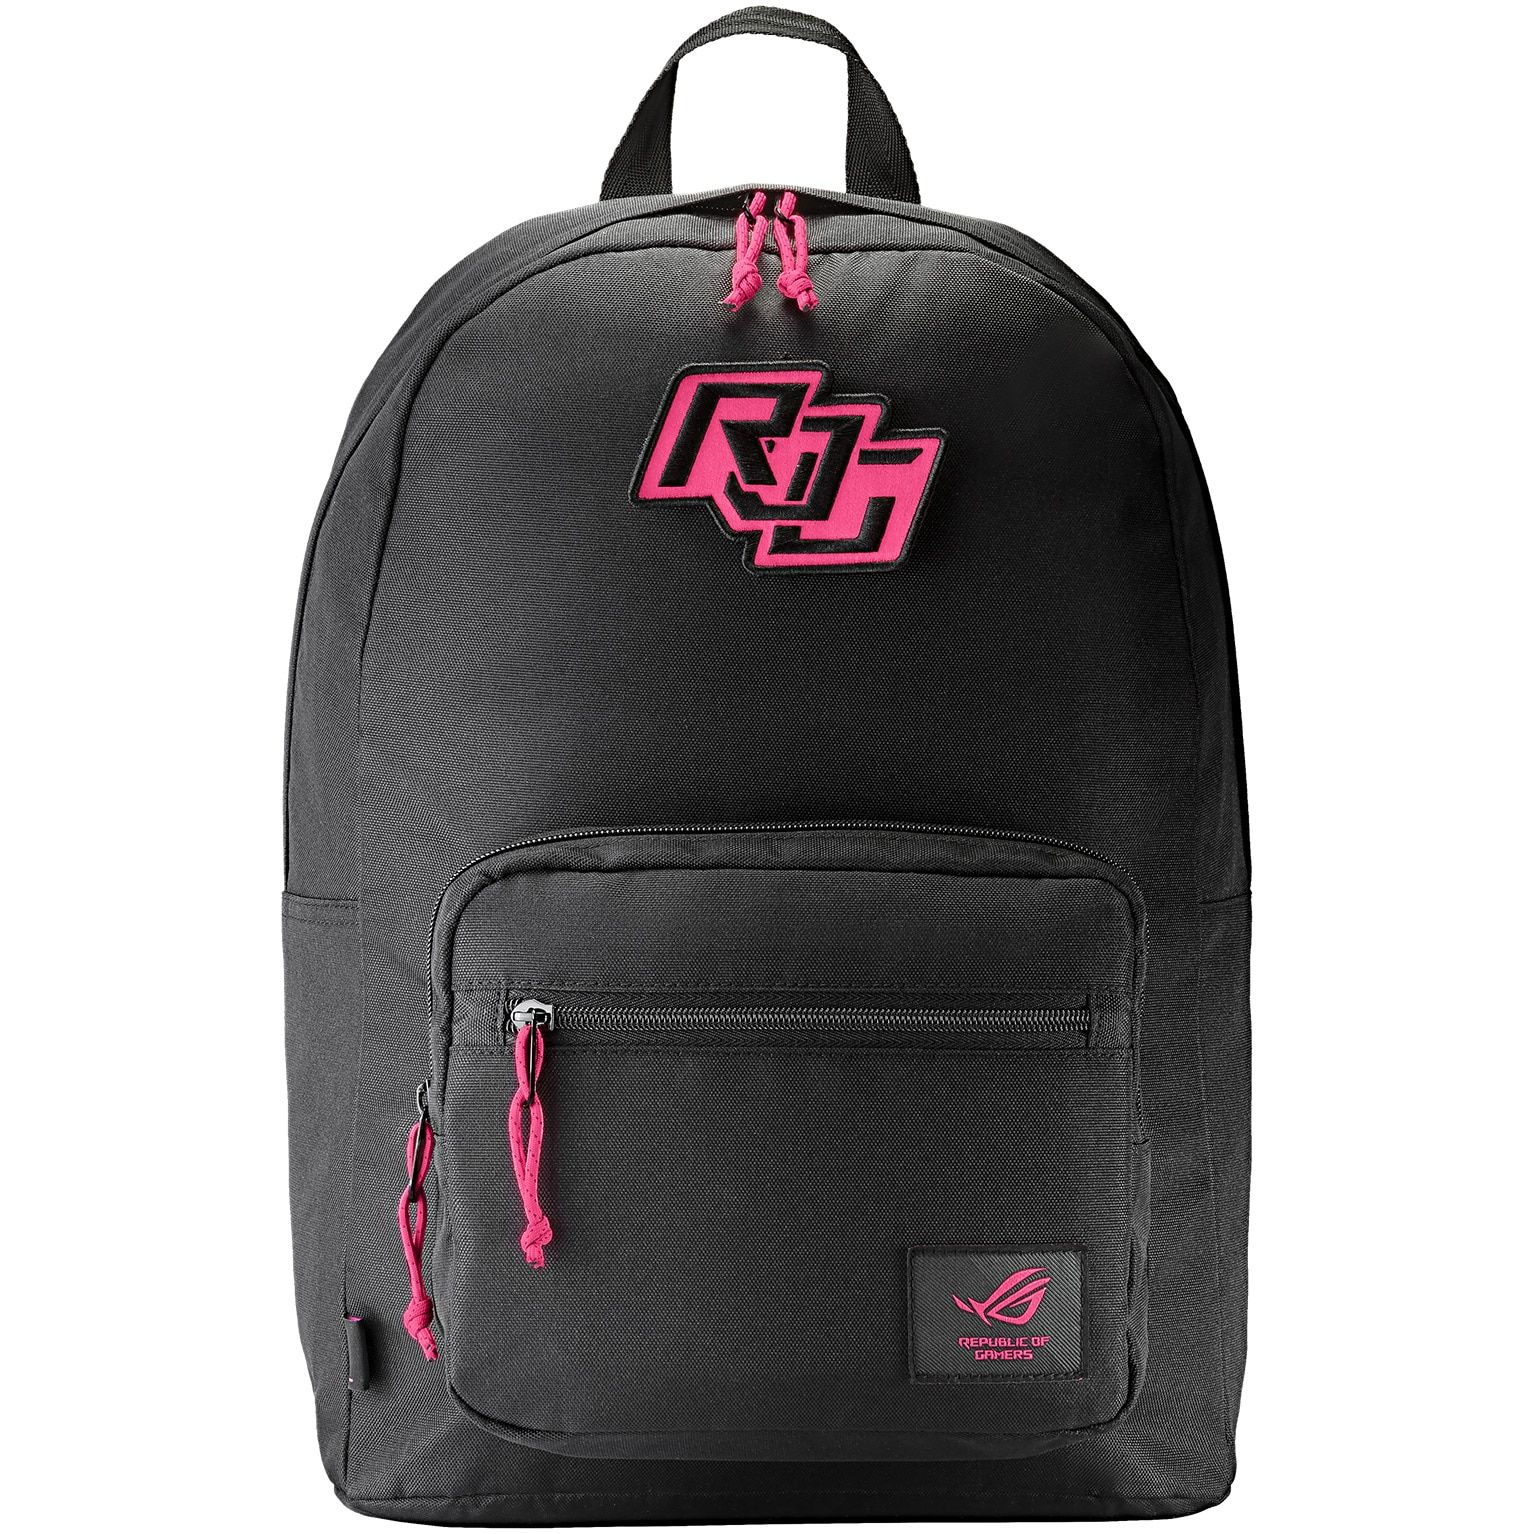 ASUS ROG Ranger BackPack BP1503G up to 15.6inch 16liter NB Comp 361x275x26mm water-repellent 2Y Electro Punk_3